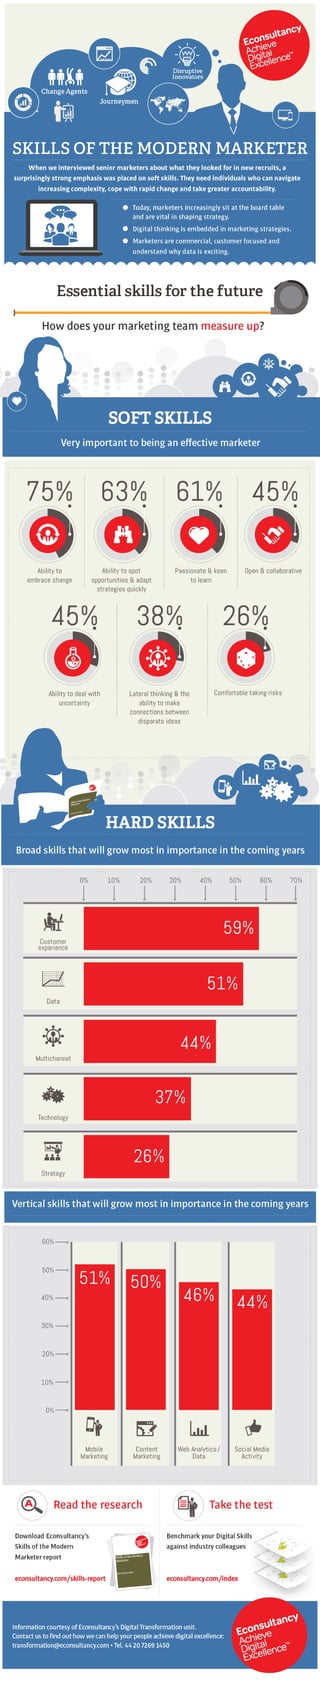 Skills of the modern marketer. Econsultancy infographic